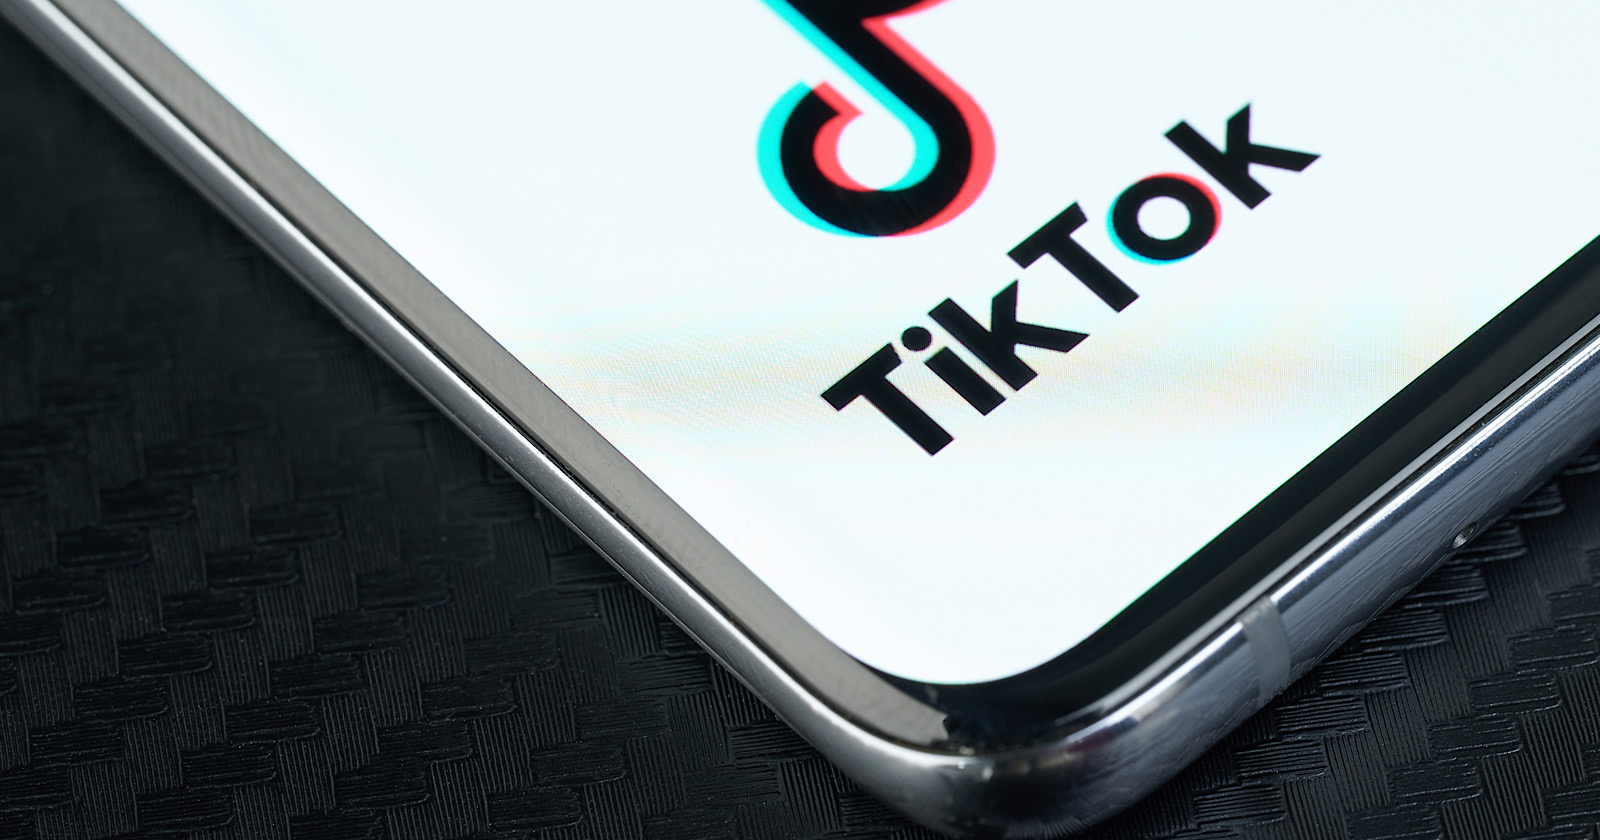 7 TikTok Stats Show Impact Of Combining Paid & Organic Content